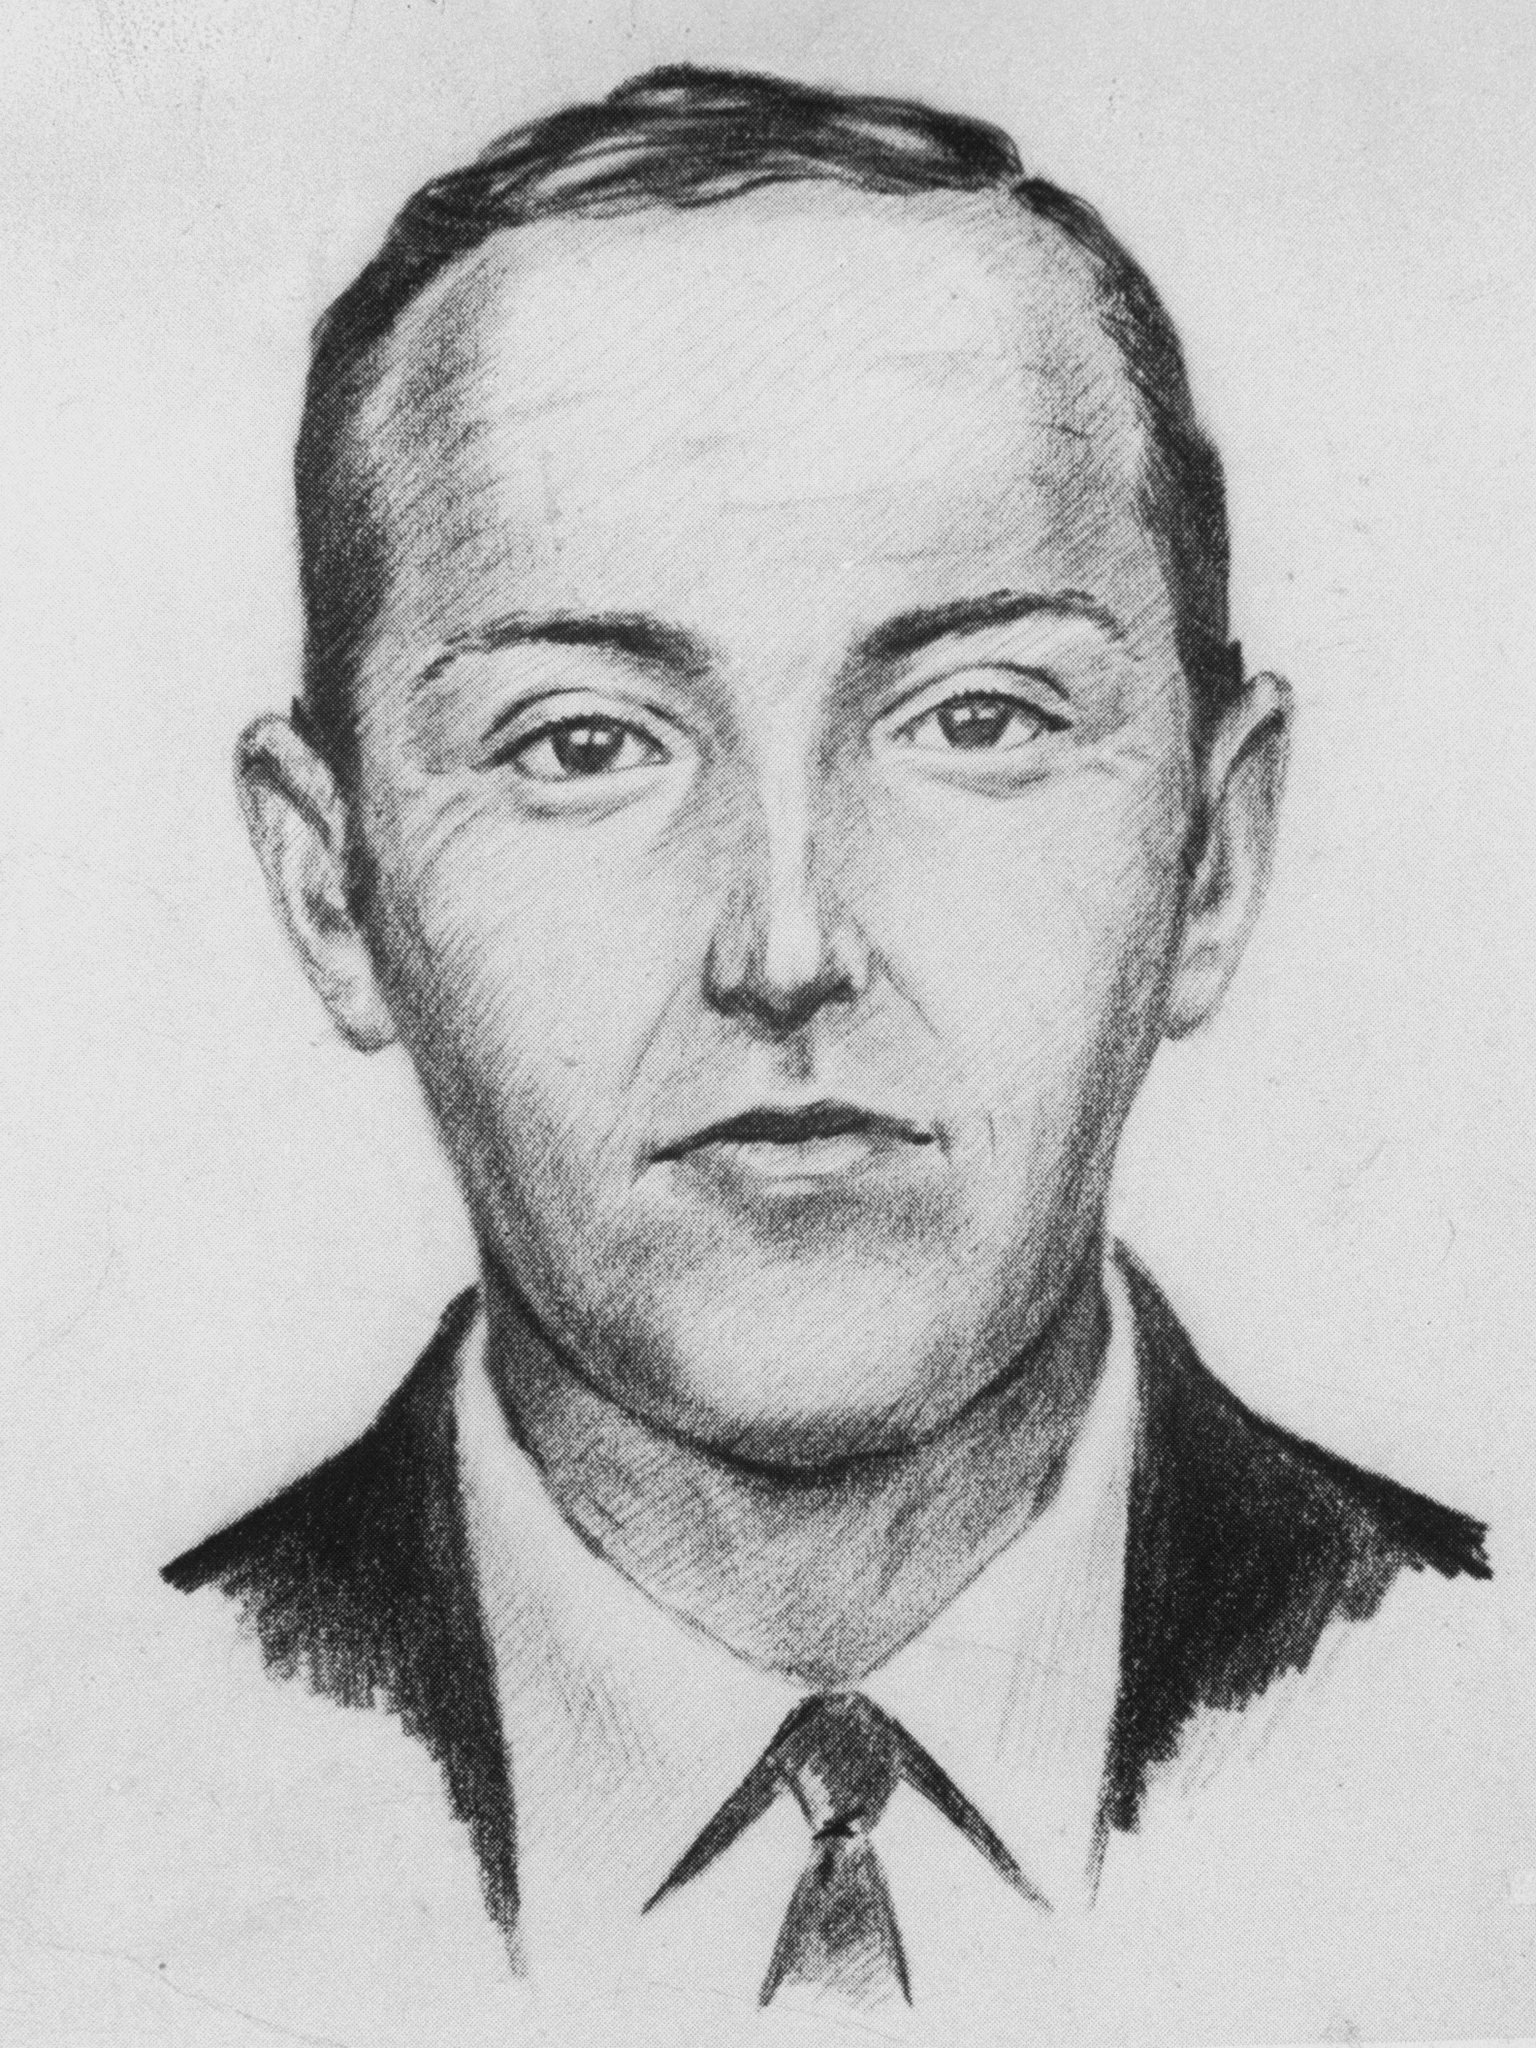 An FBI sketch of Northwest Airlines hijacker, D.B. Cooper. Cooper took control of a commerical airliner headed for Seattle in 1971. True crime fans have discussed him for decades.